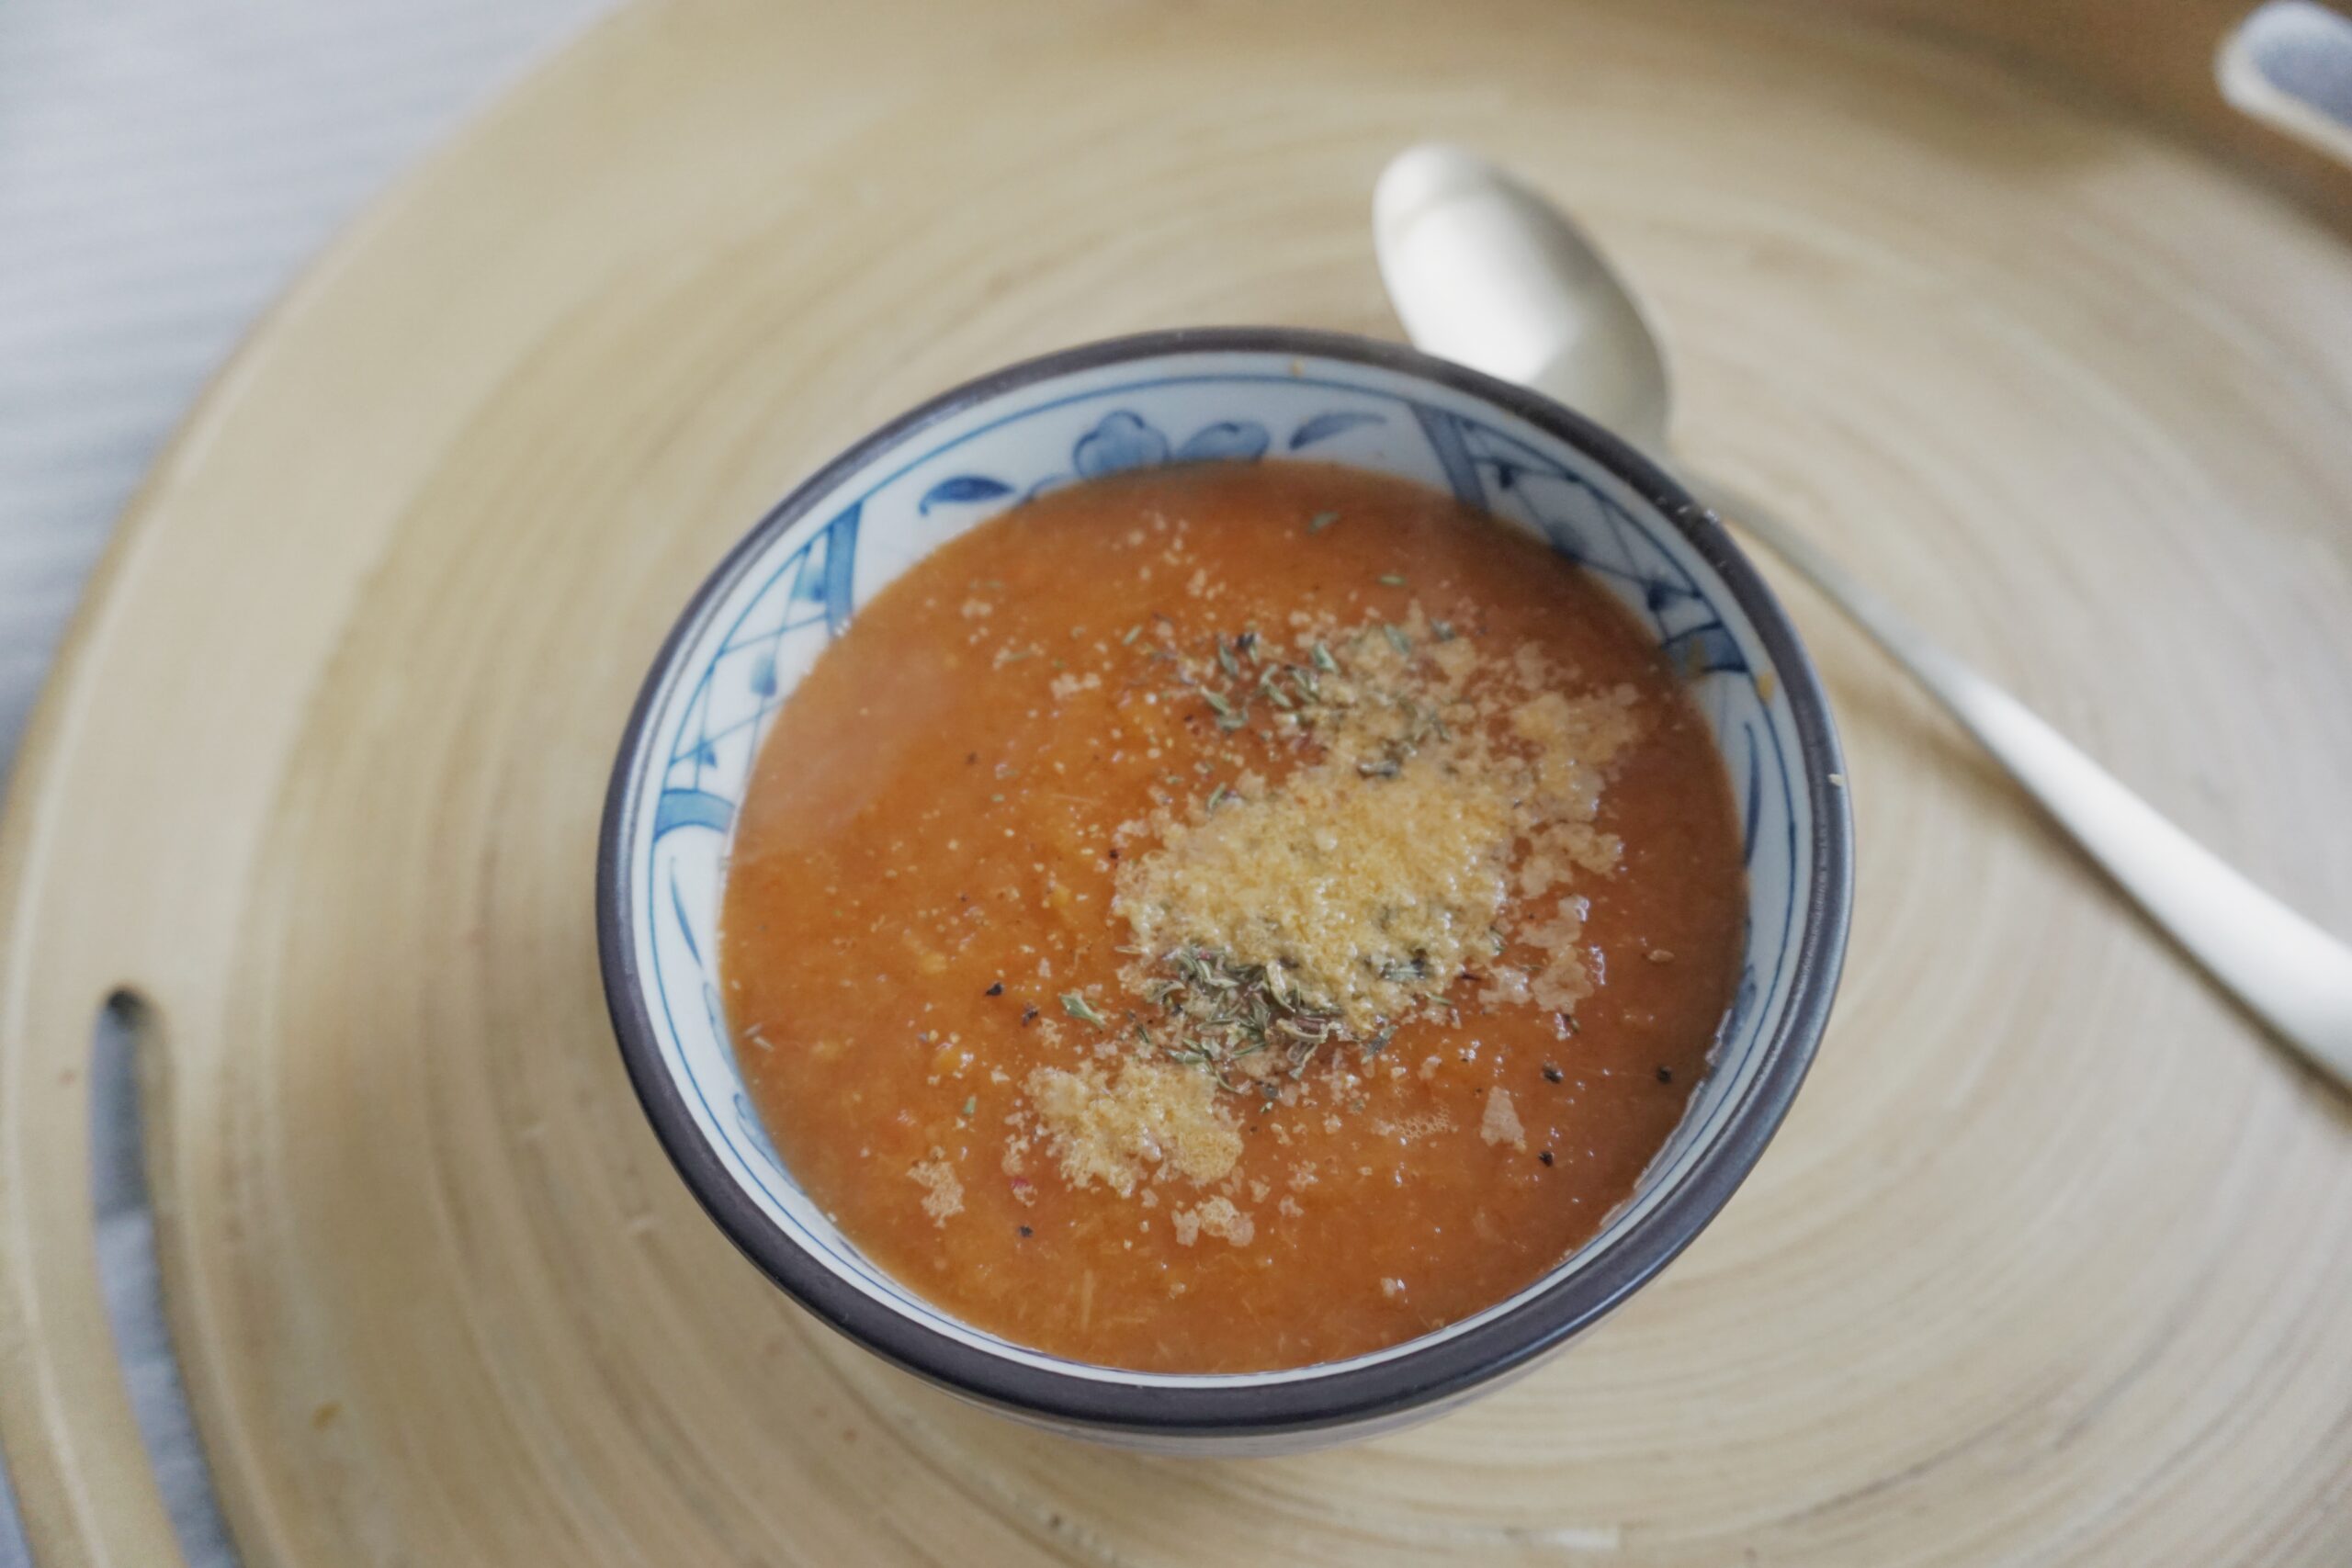 Tomato and fennel soup in a bowl with herbs on a wooden plate.